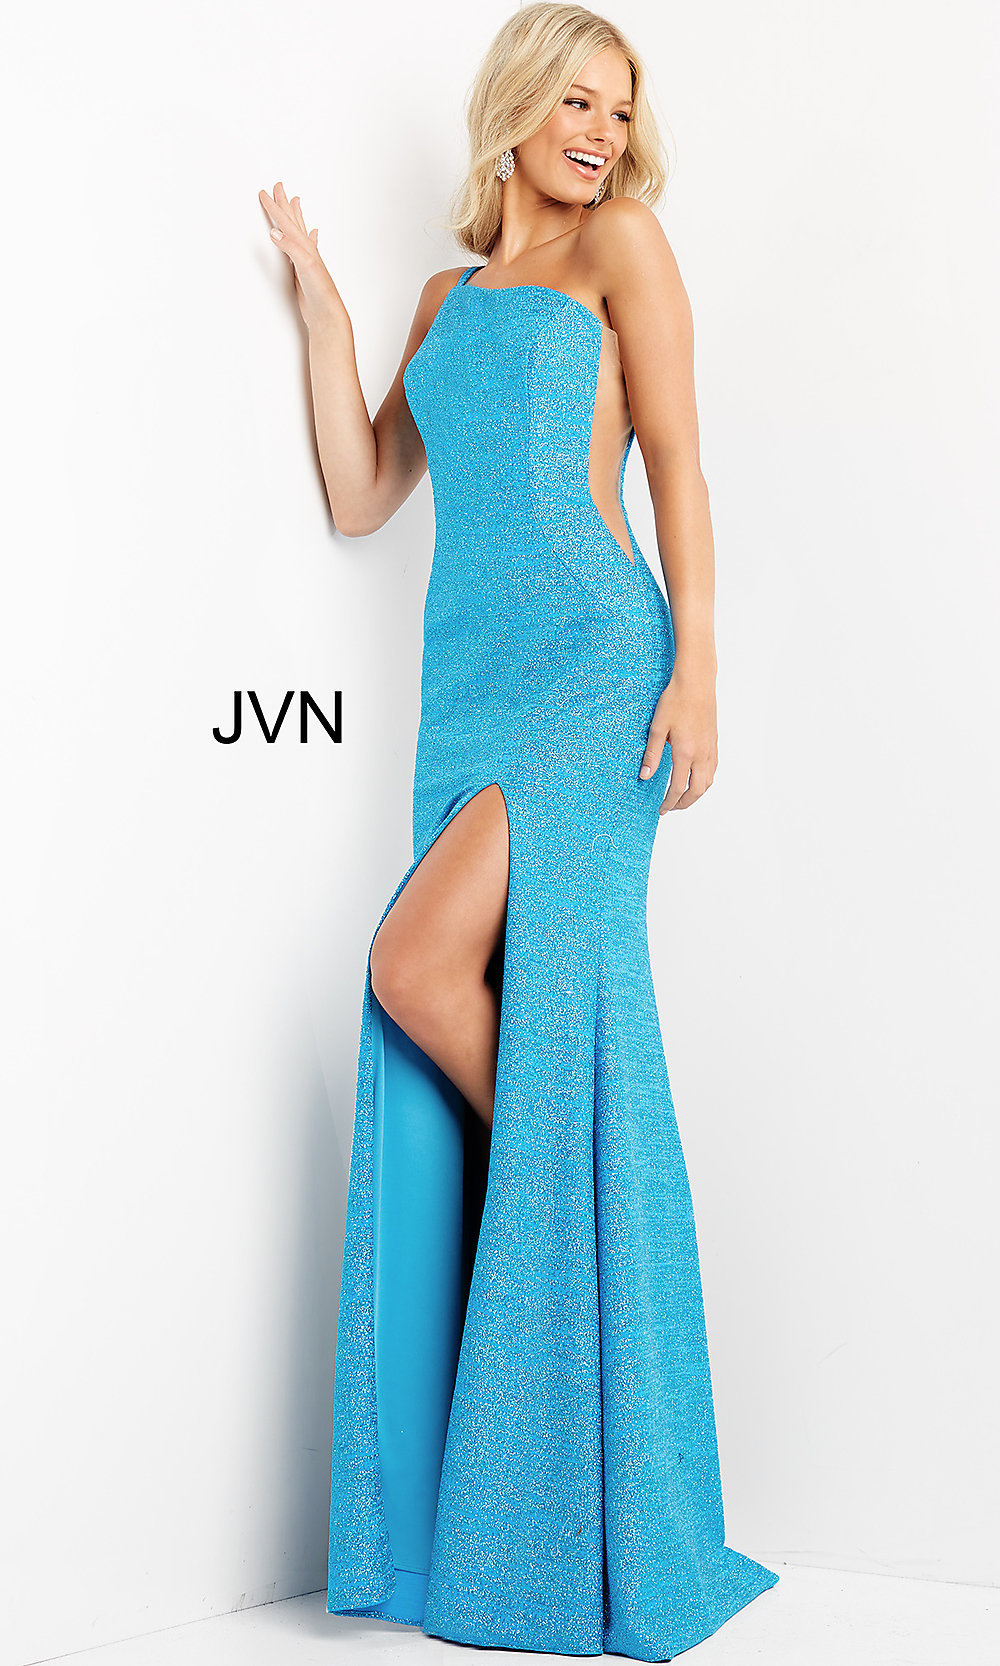 Ocean Long Glitter Prom Dress with Illusion Side Panels